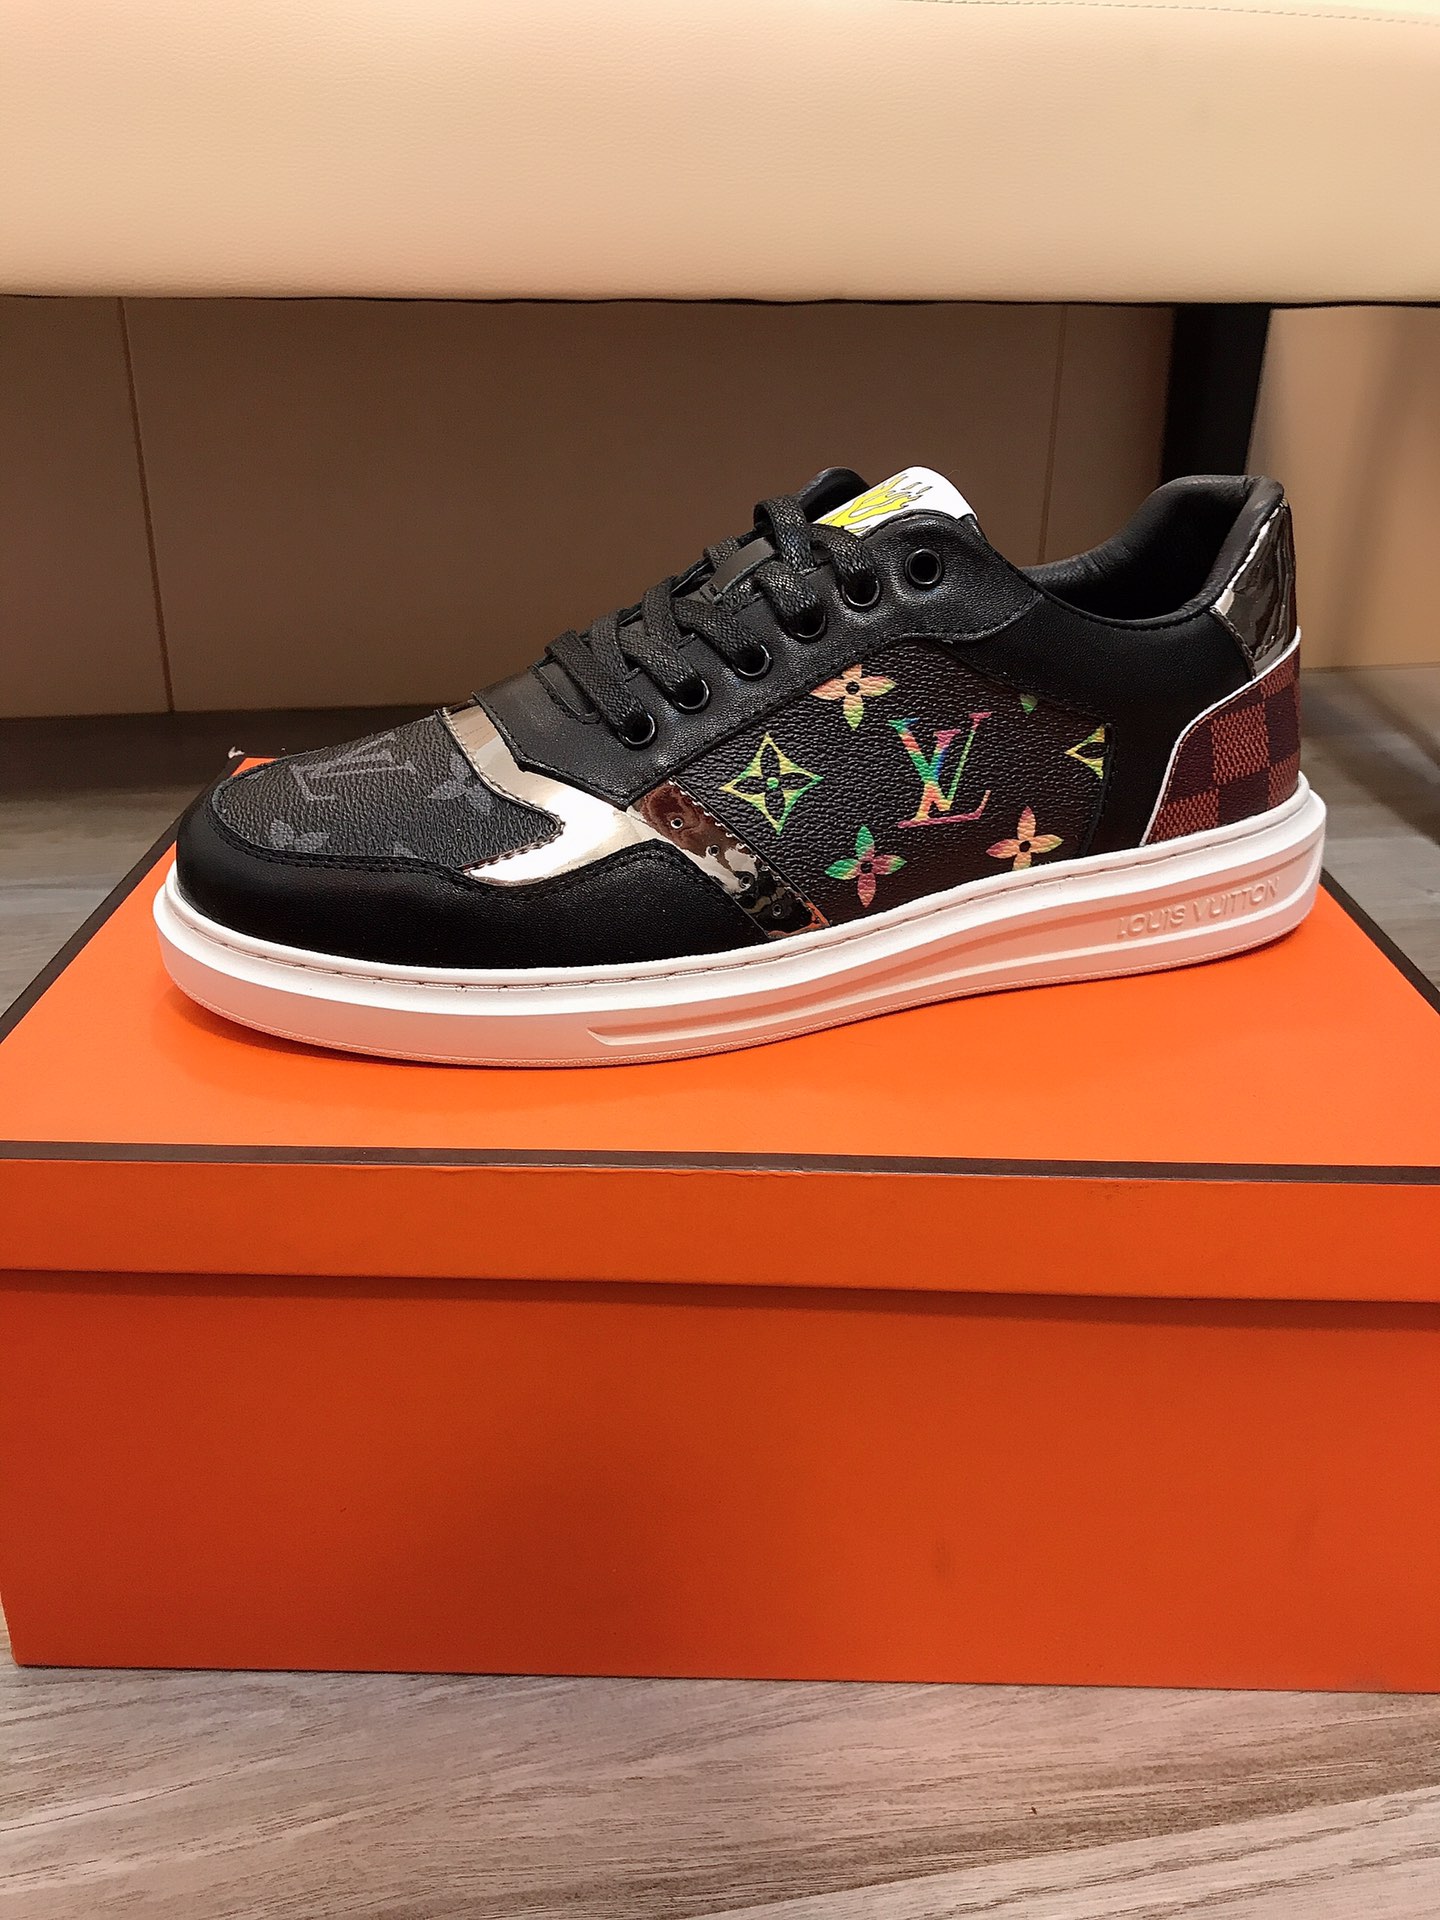 [Latest LV LV] New casual Korean-style men's shoes, brand new design, perfect workmanship, high qual